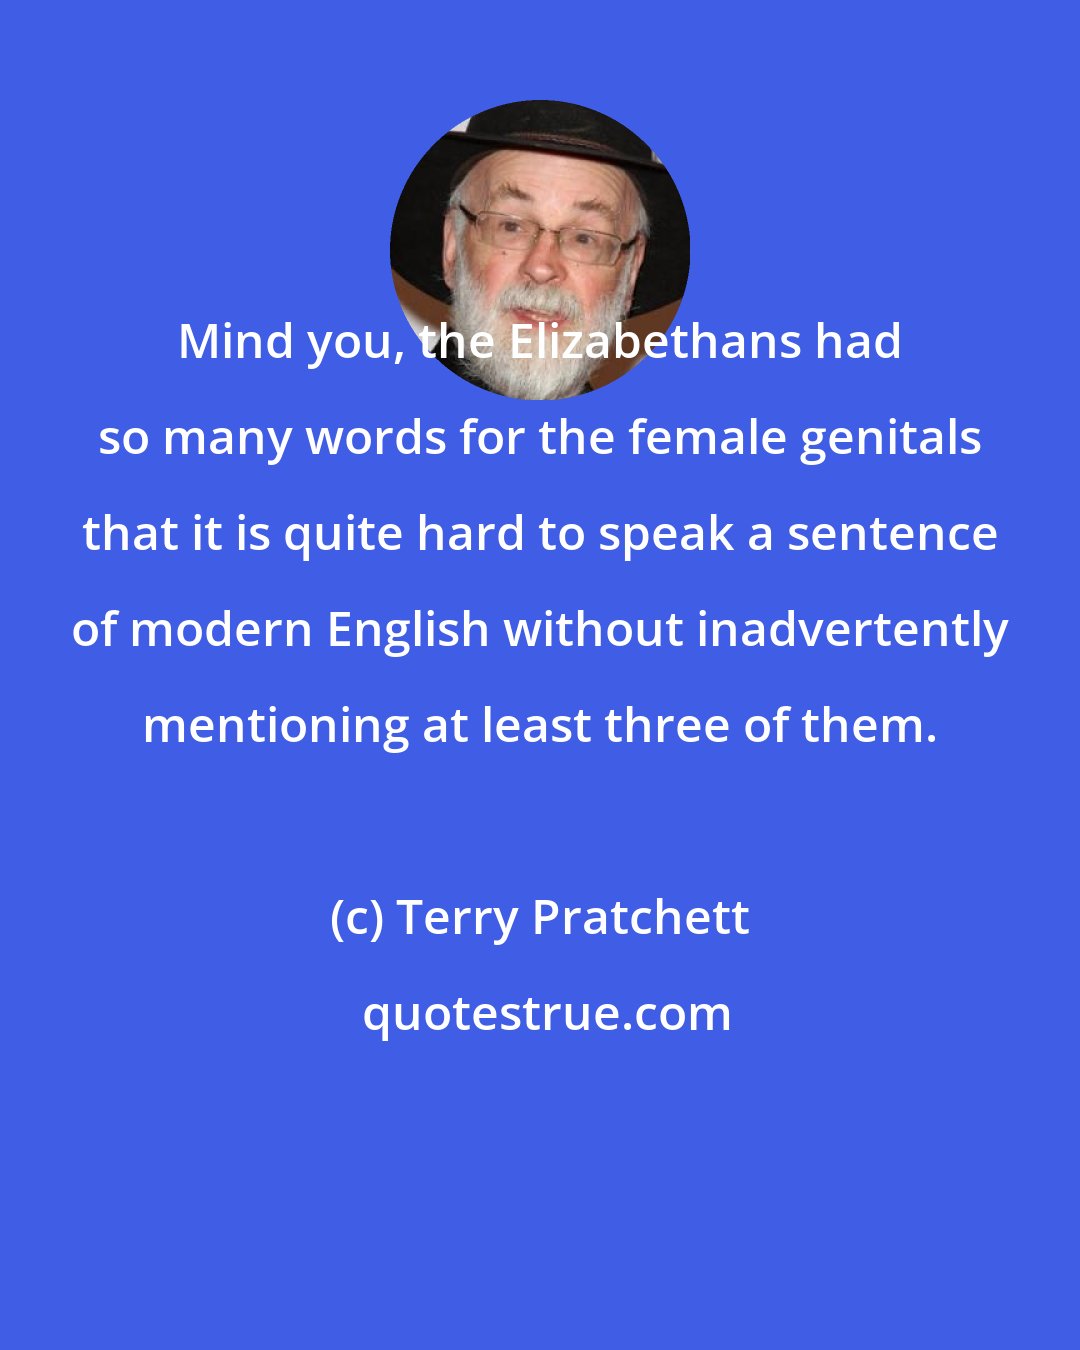 Terry Pratchett: Mind you, the Elizabethans had so many words for the female genitals that it is quite hard to speak a sentence of modern English without inadvertently mentioning at least three of them.